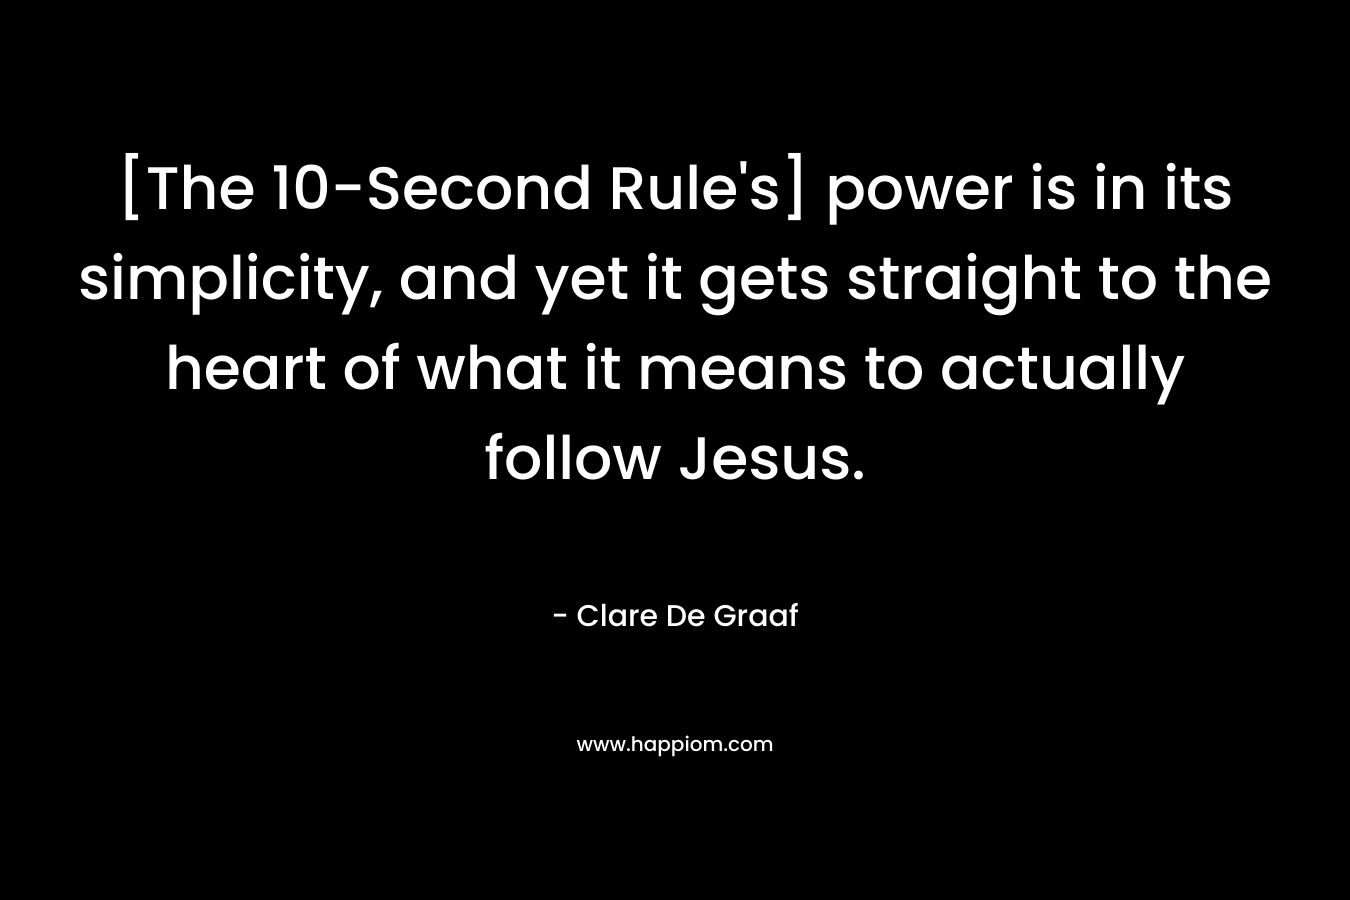 [The 10-Second Rule's] power is in its simplicity, and yet it gets straight to the heart of what it means to actually follow Jesus.